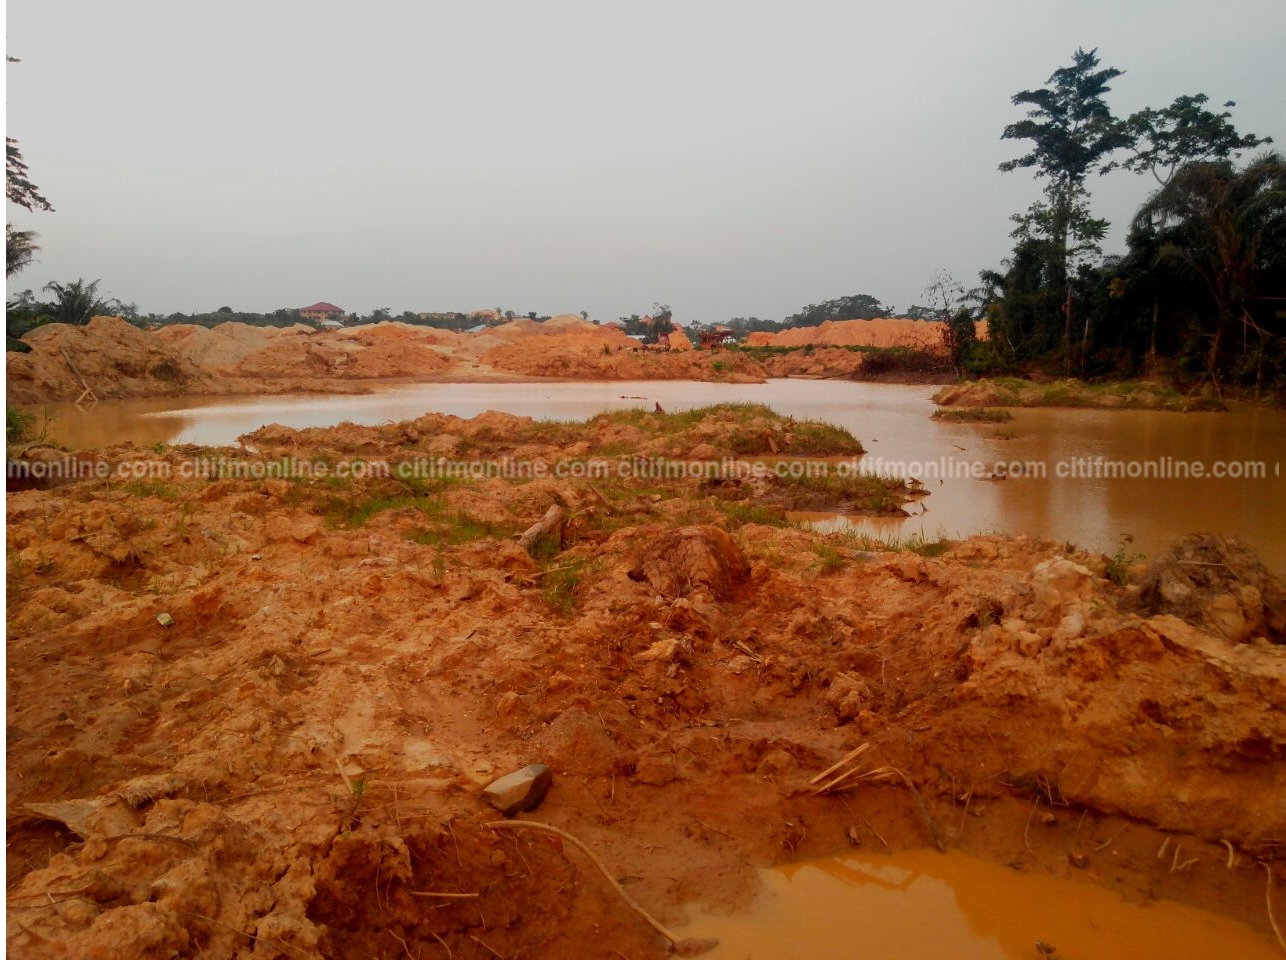 BECE candidate drowns in abandoned galamsey pit